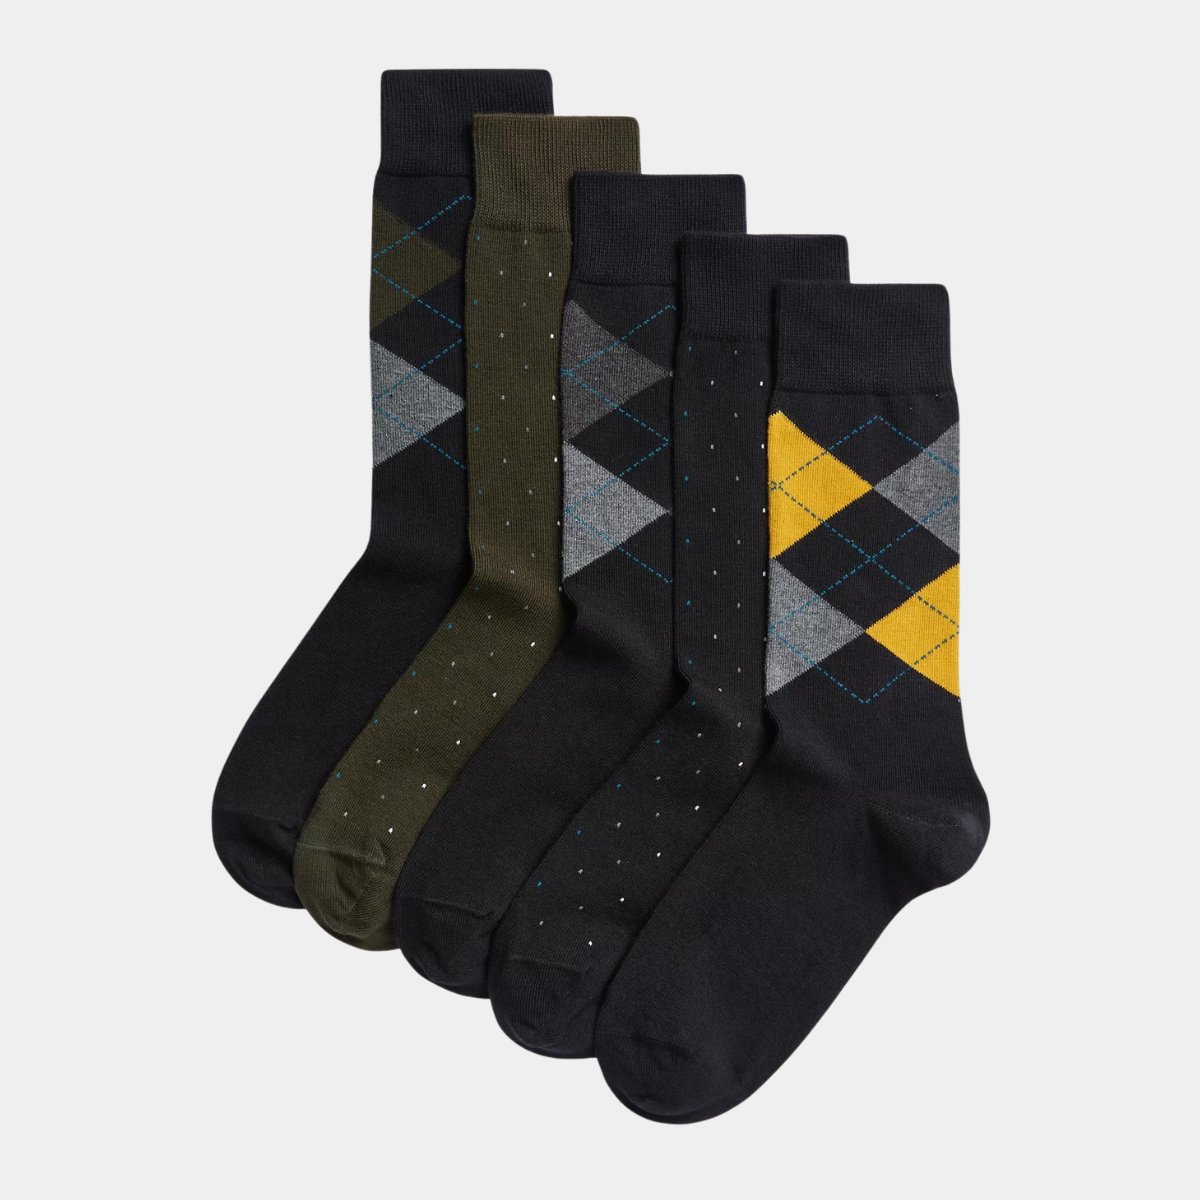 Set of 5 Argyle Print Socks for Men – You Know Who's